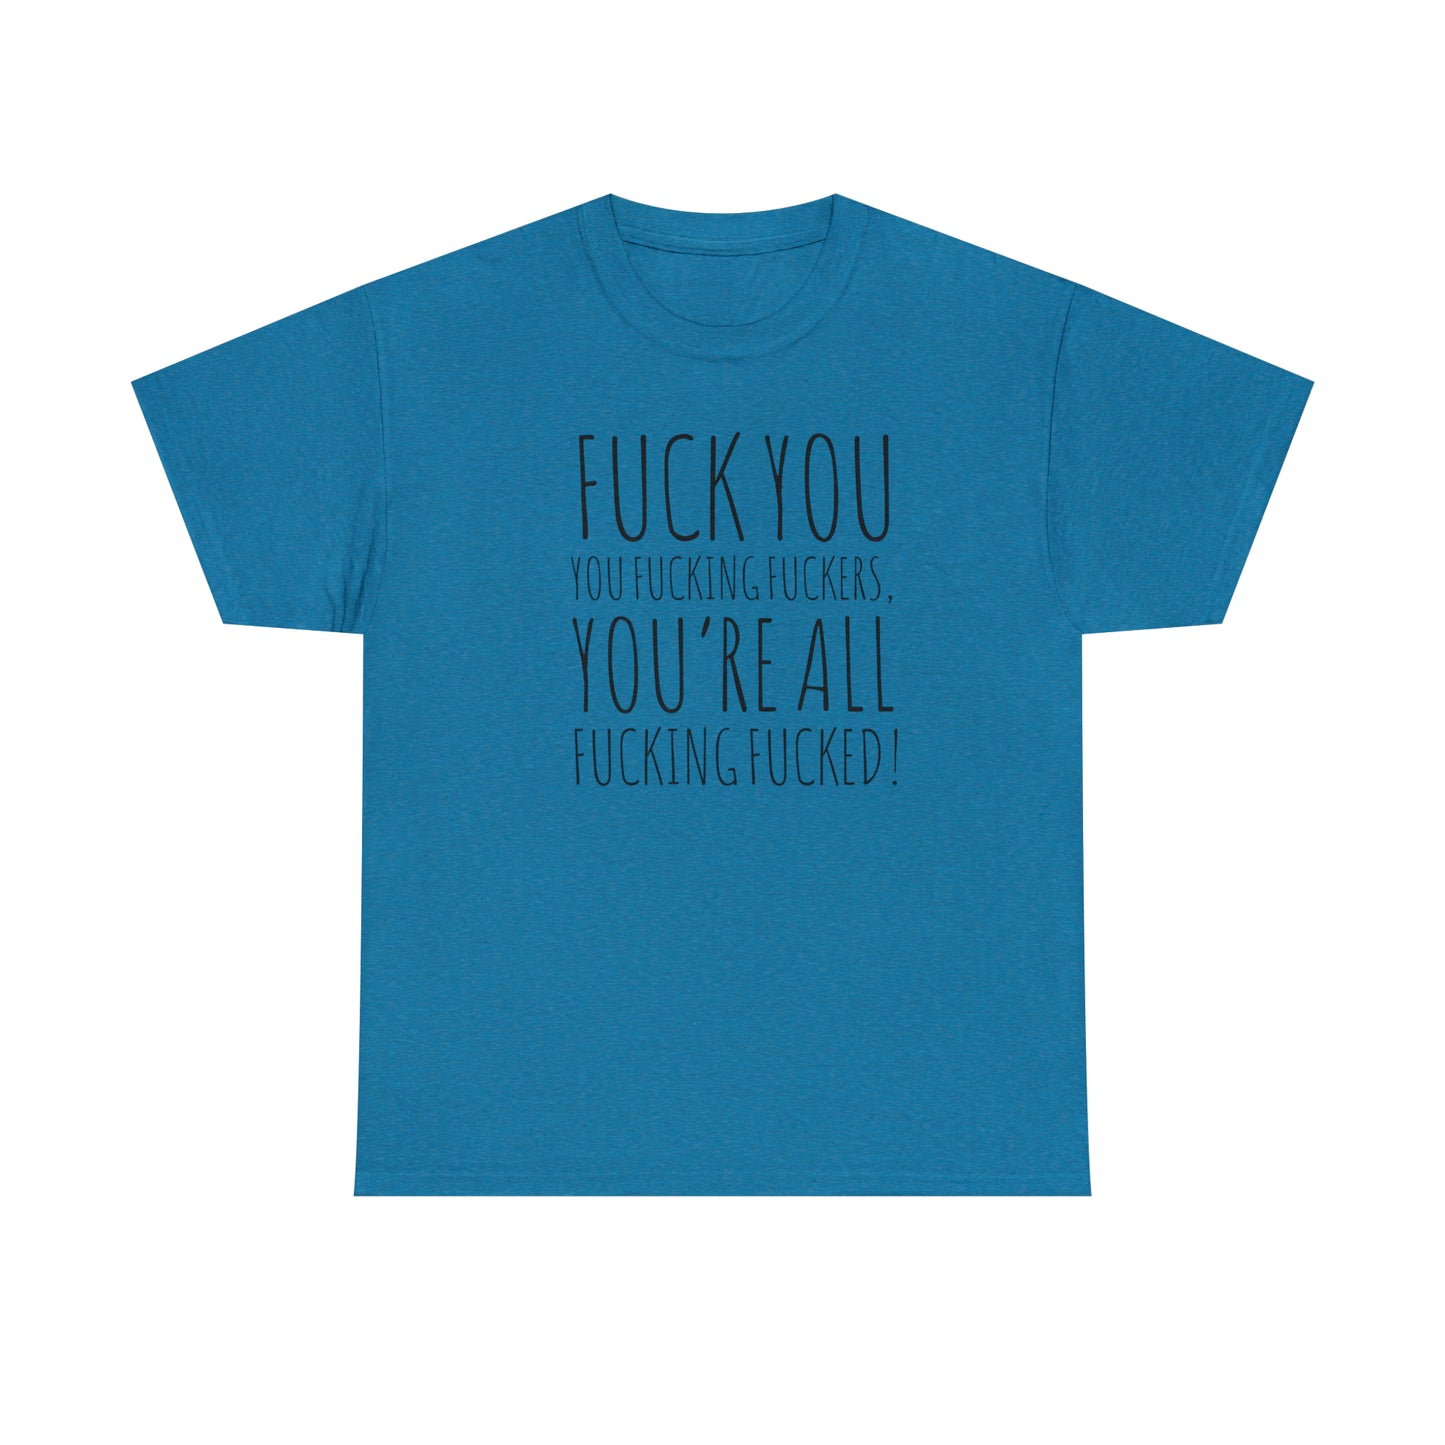 Sarcastic T-Shirt For Fuck You Fuckers TShirt For Funny Adult Content T Shirt Satire Shirt Ironic Tee Explicit TShirt Curse Words Tee